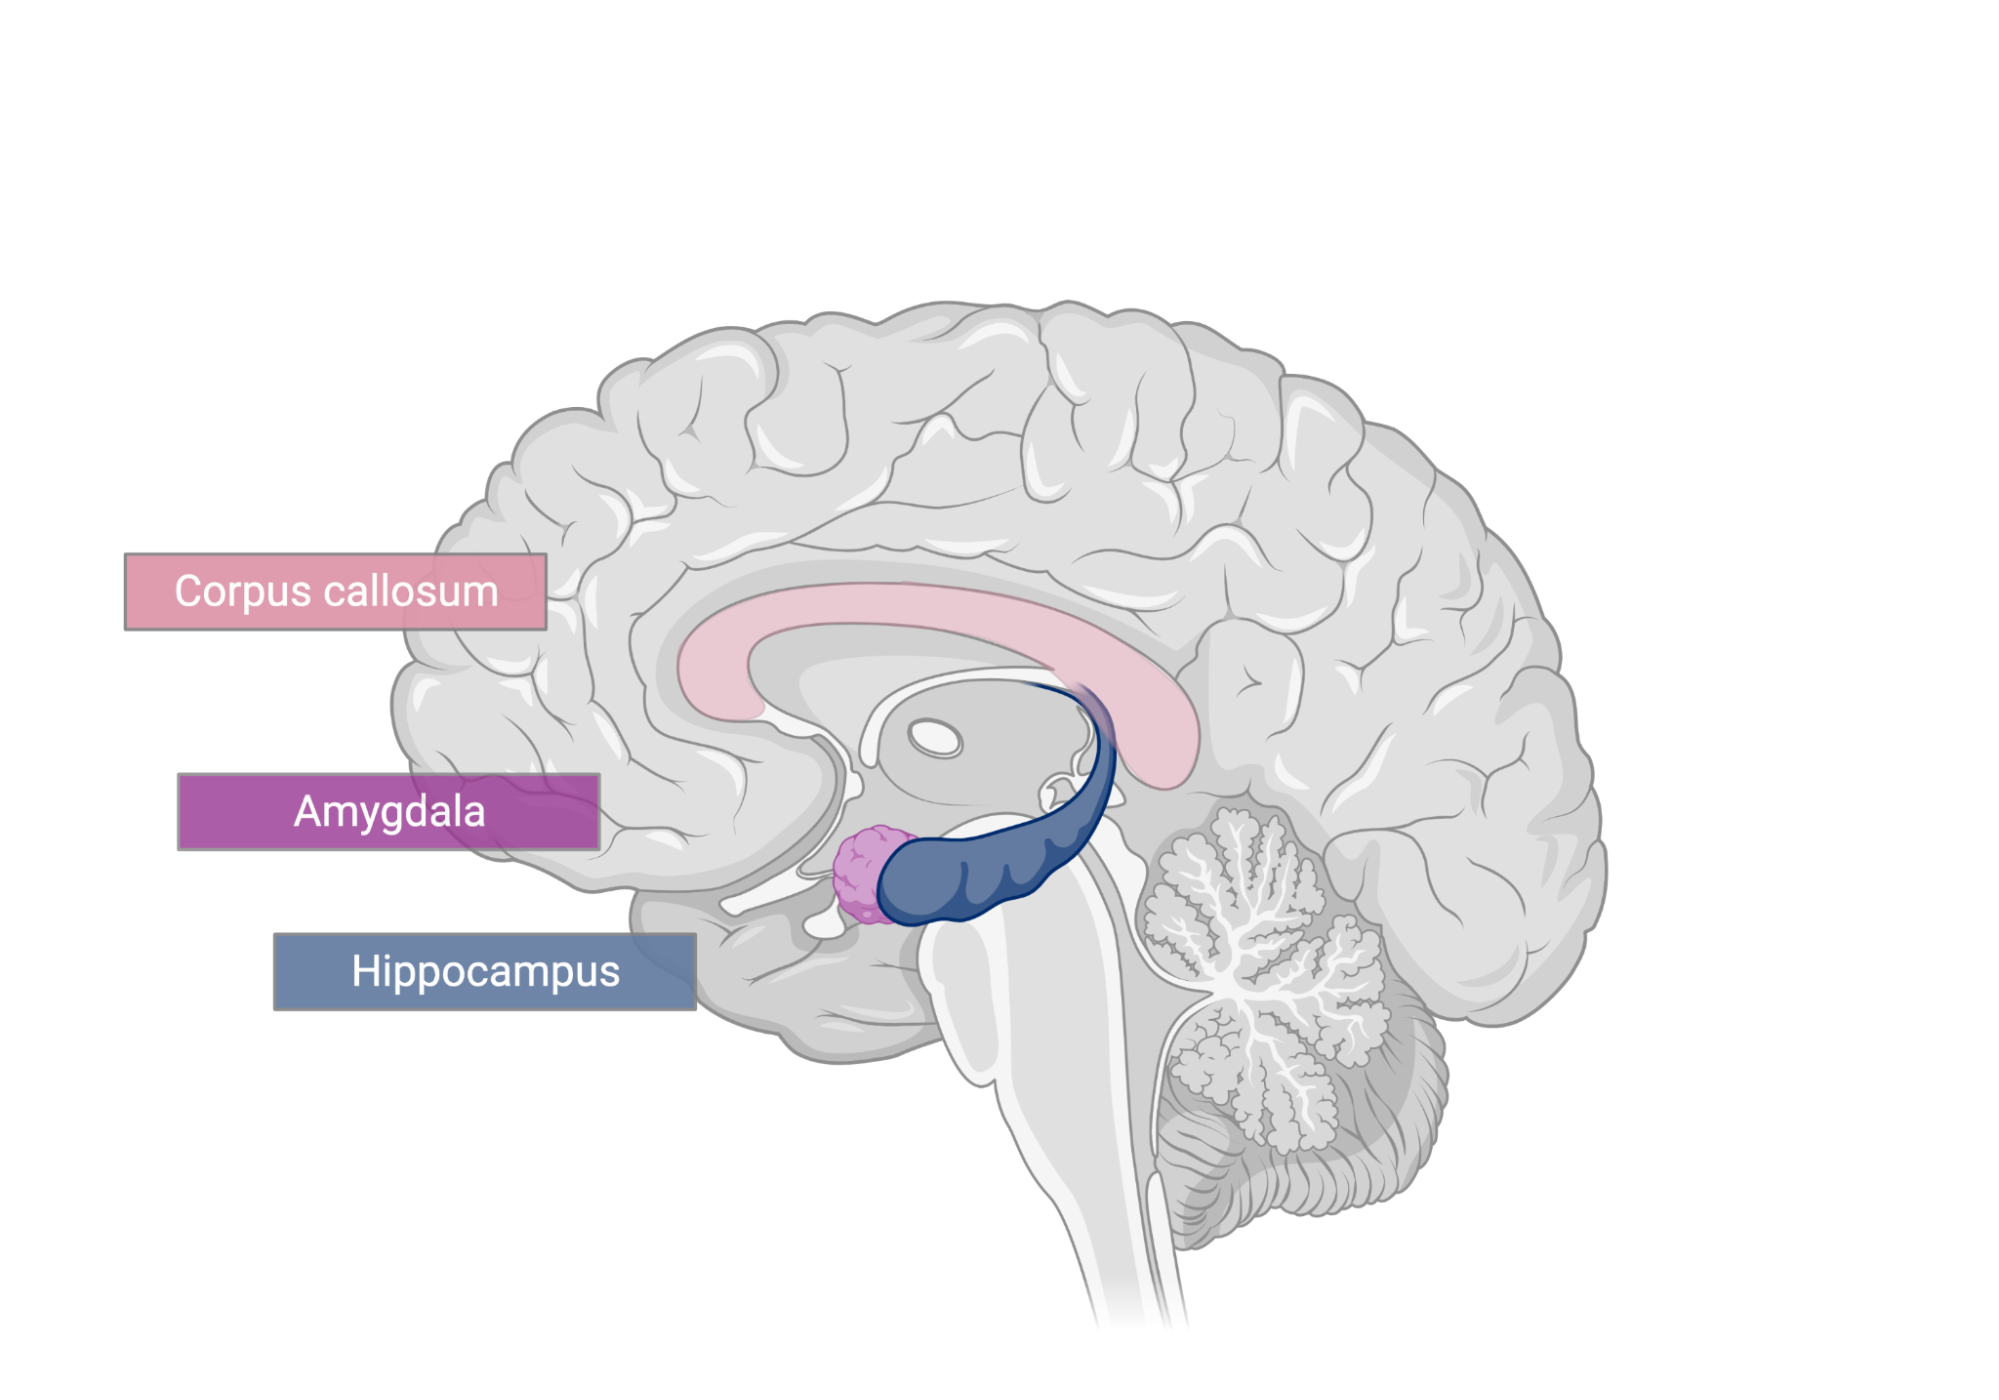 A diagram of a translucent brain is shown, cut along the midline, showing the locations of the corpus callosum, amygdala, and hippocampus.